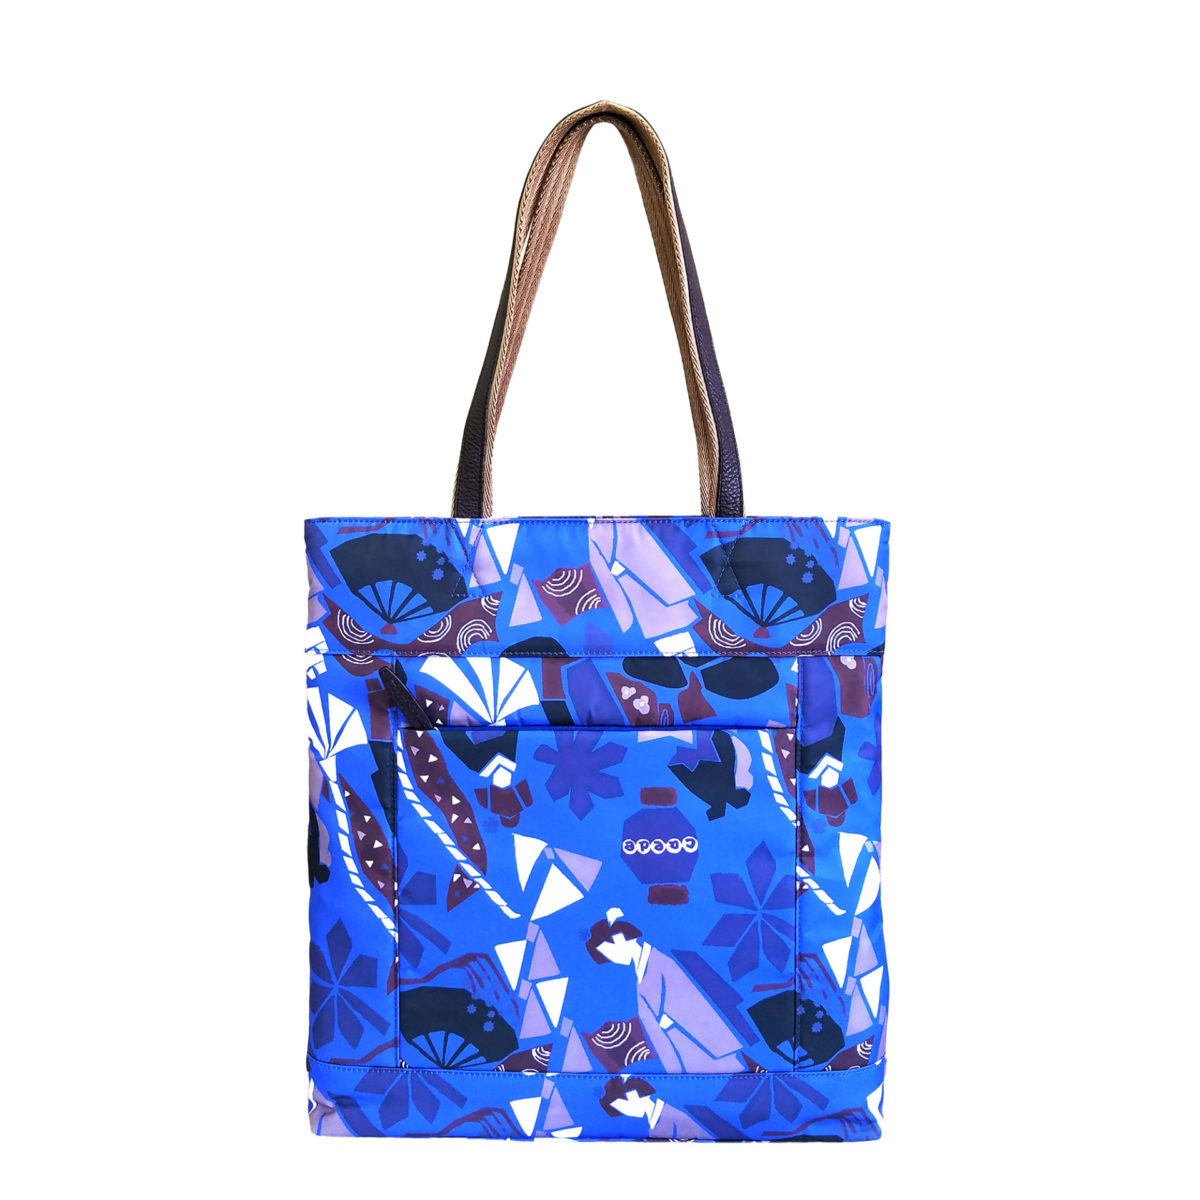 maiko puzzule etna tote blue